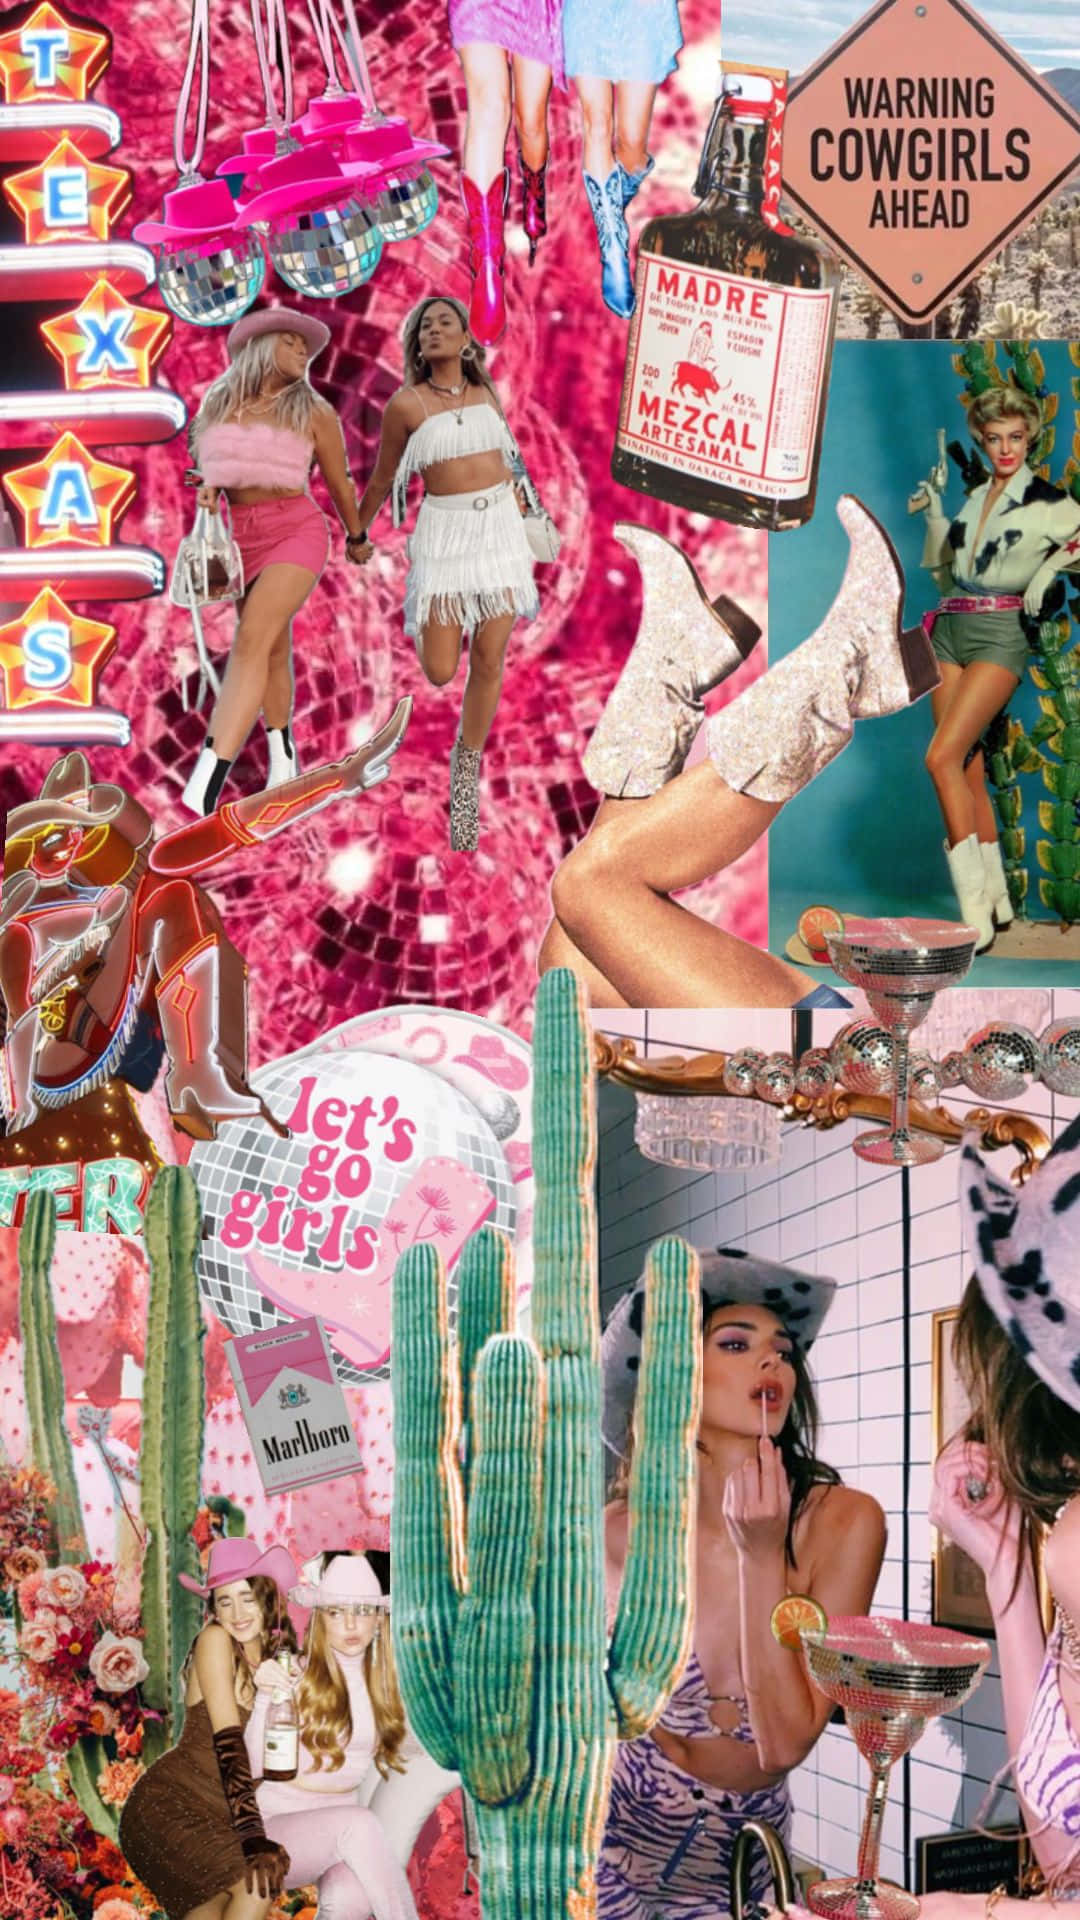 Disco Cowgirl Collage Aesthetic.jpg Wallpaper